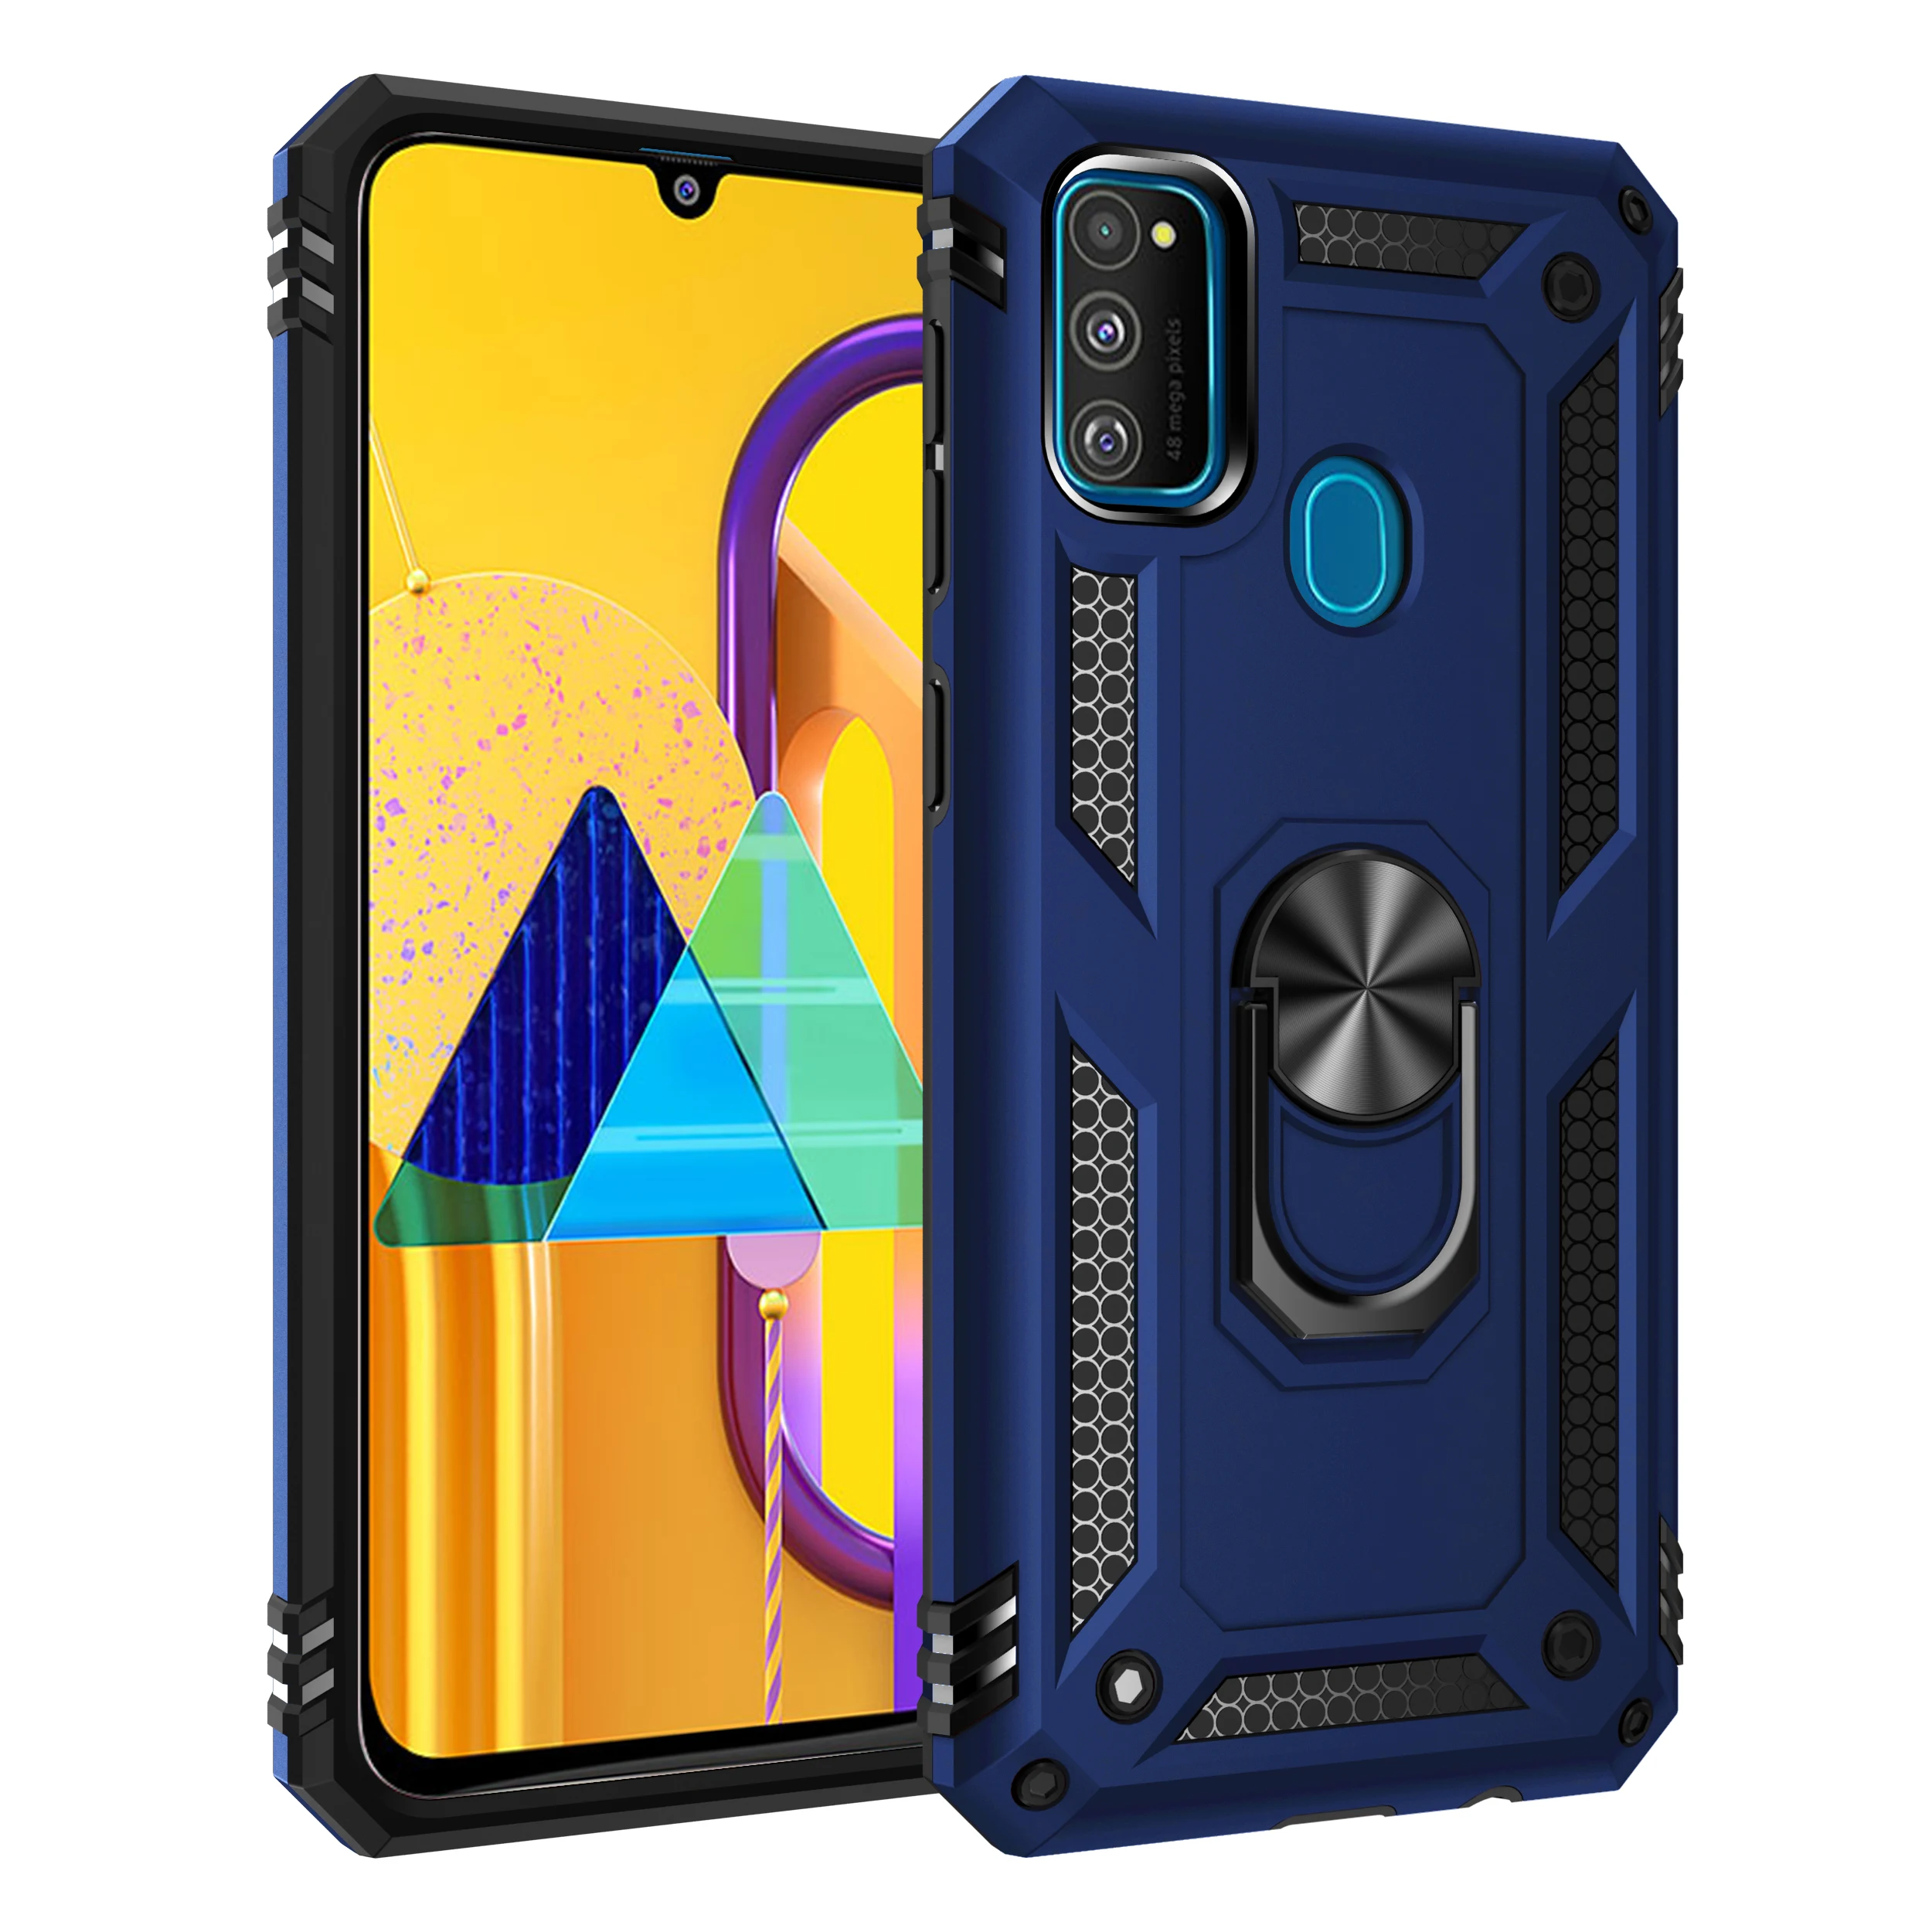 

Phone Case For Samsung Galaxy M10 M20 M30 M30S M21 M31 M31S M40 M40S M60S M80S M11 M01 M51 M02 Armor Shockproof Kickstand Cover